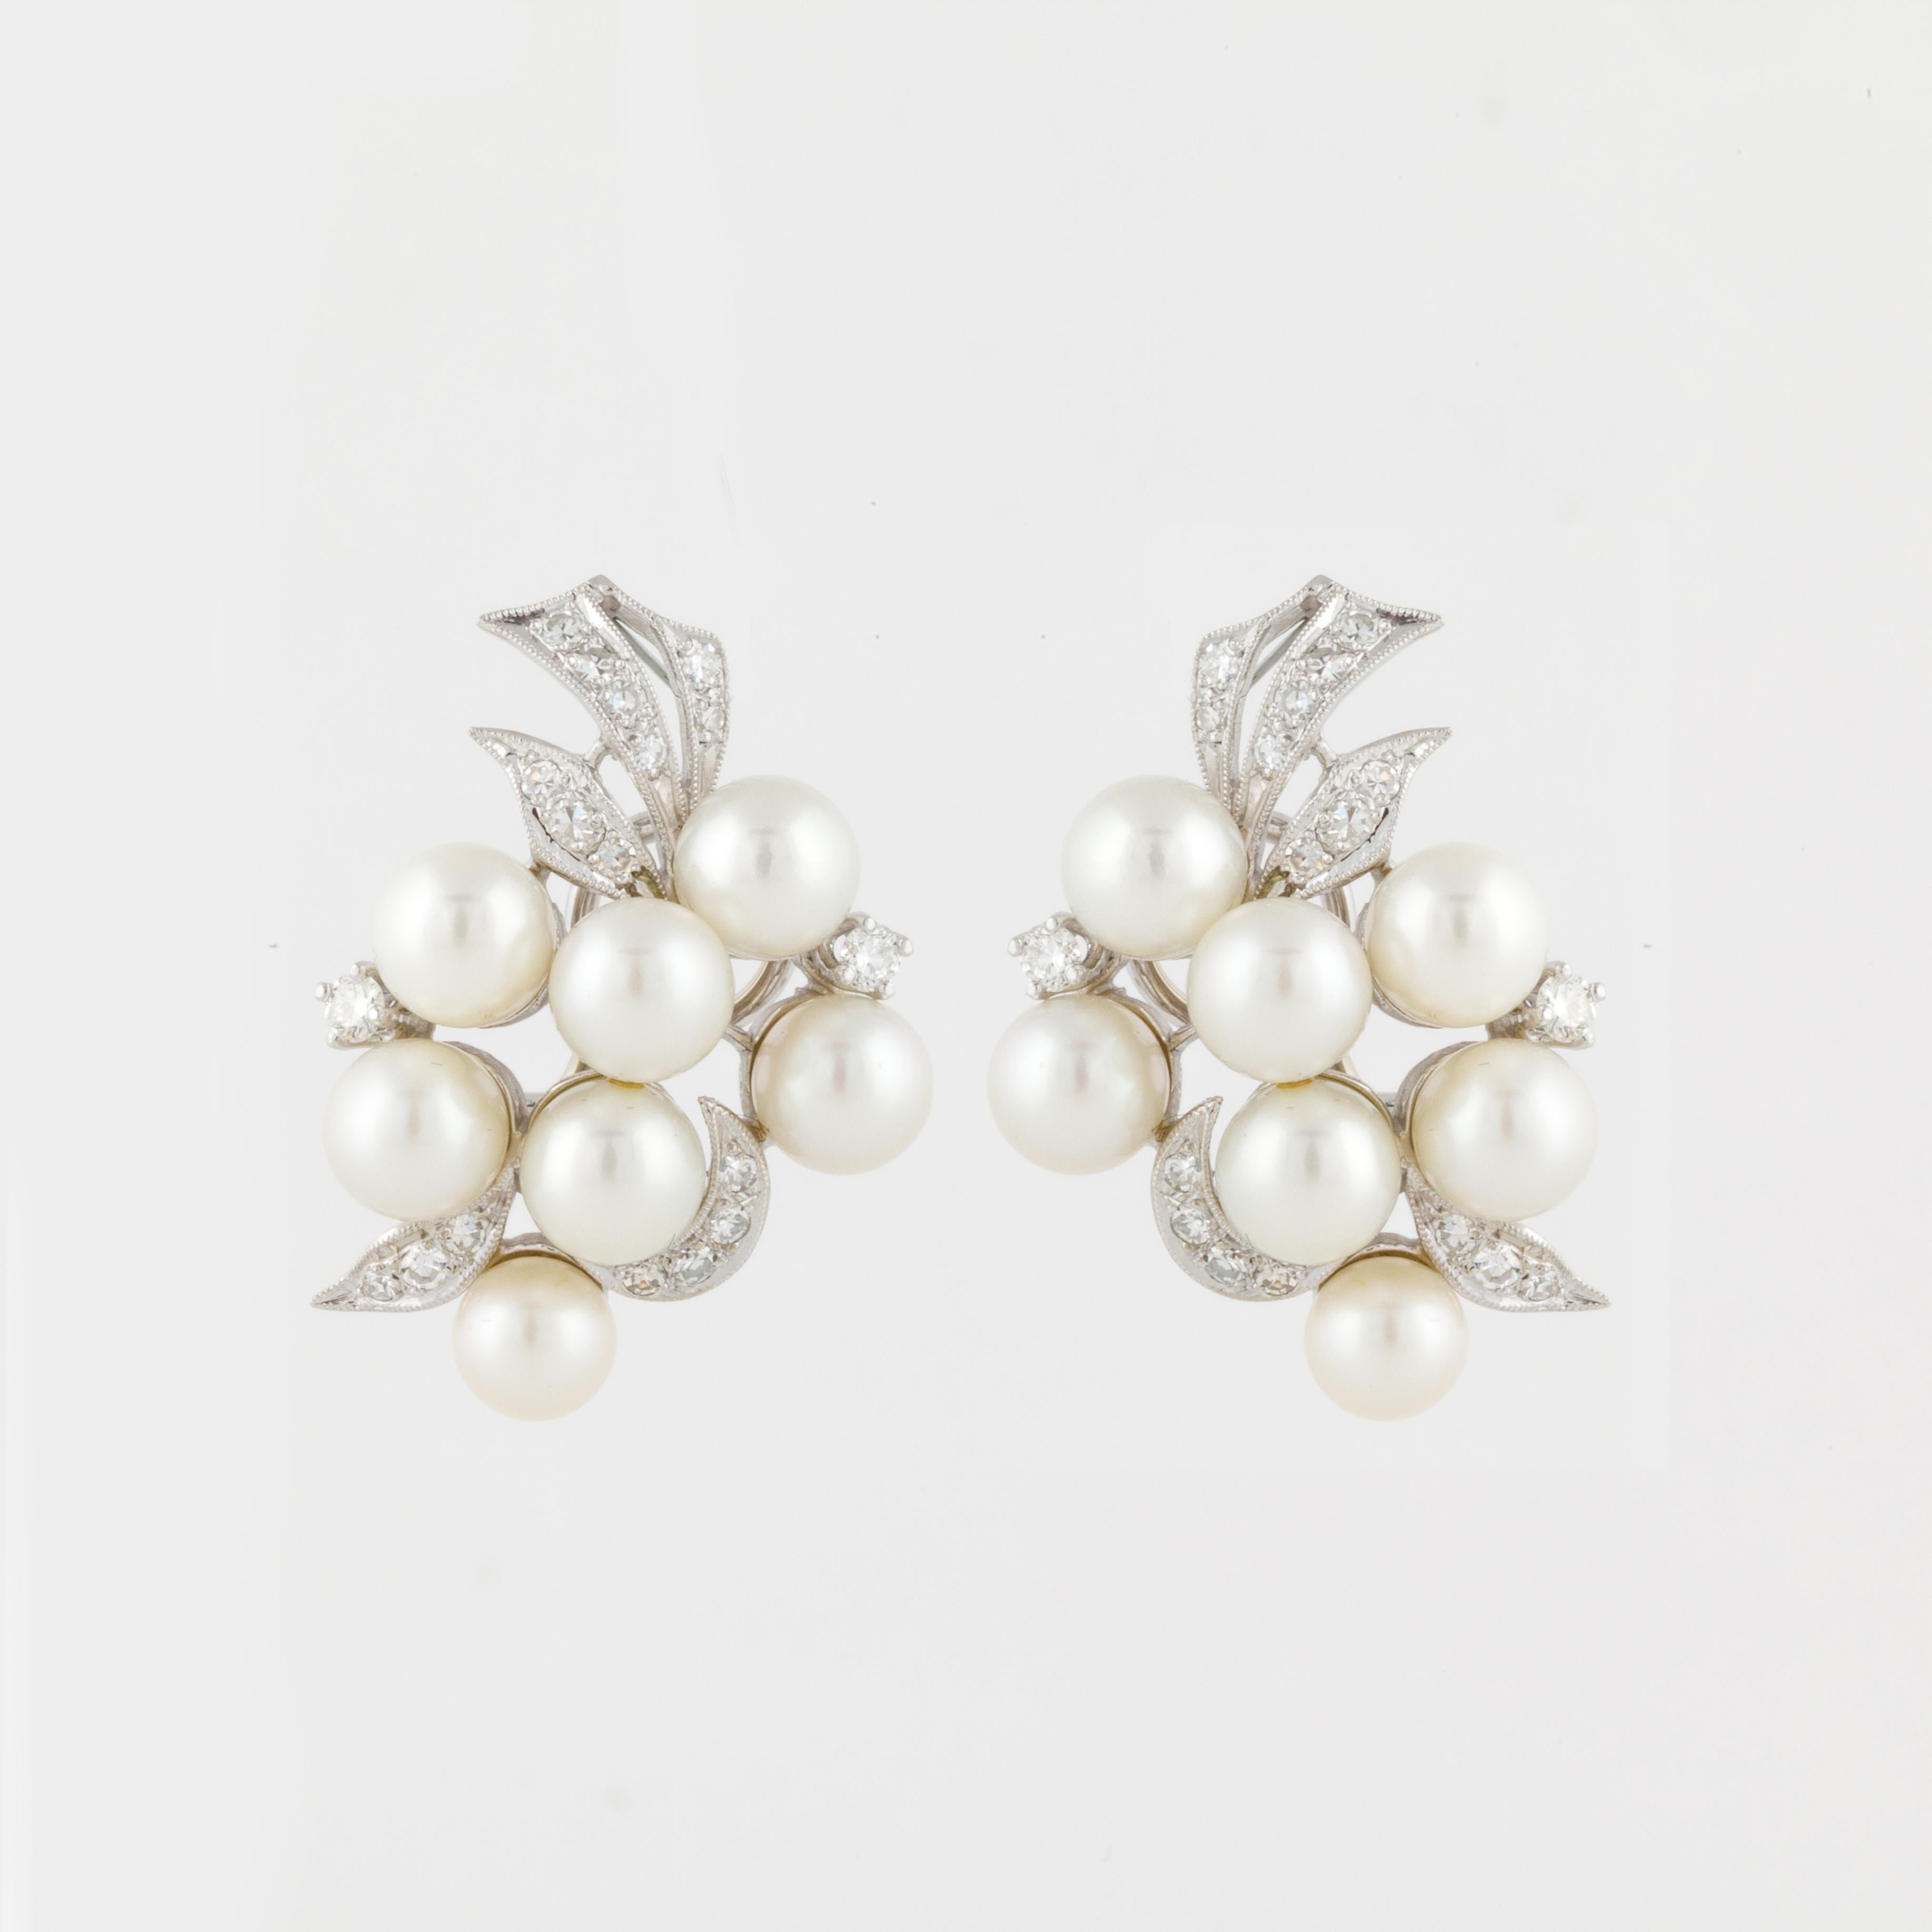 Mixed Cut Cultured Pearl and Diamond Cluster Earrings in 14 Karat White Gold